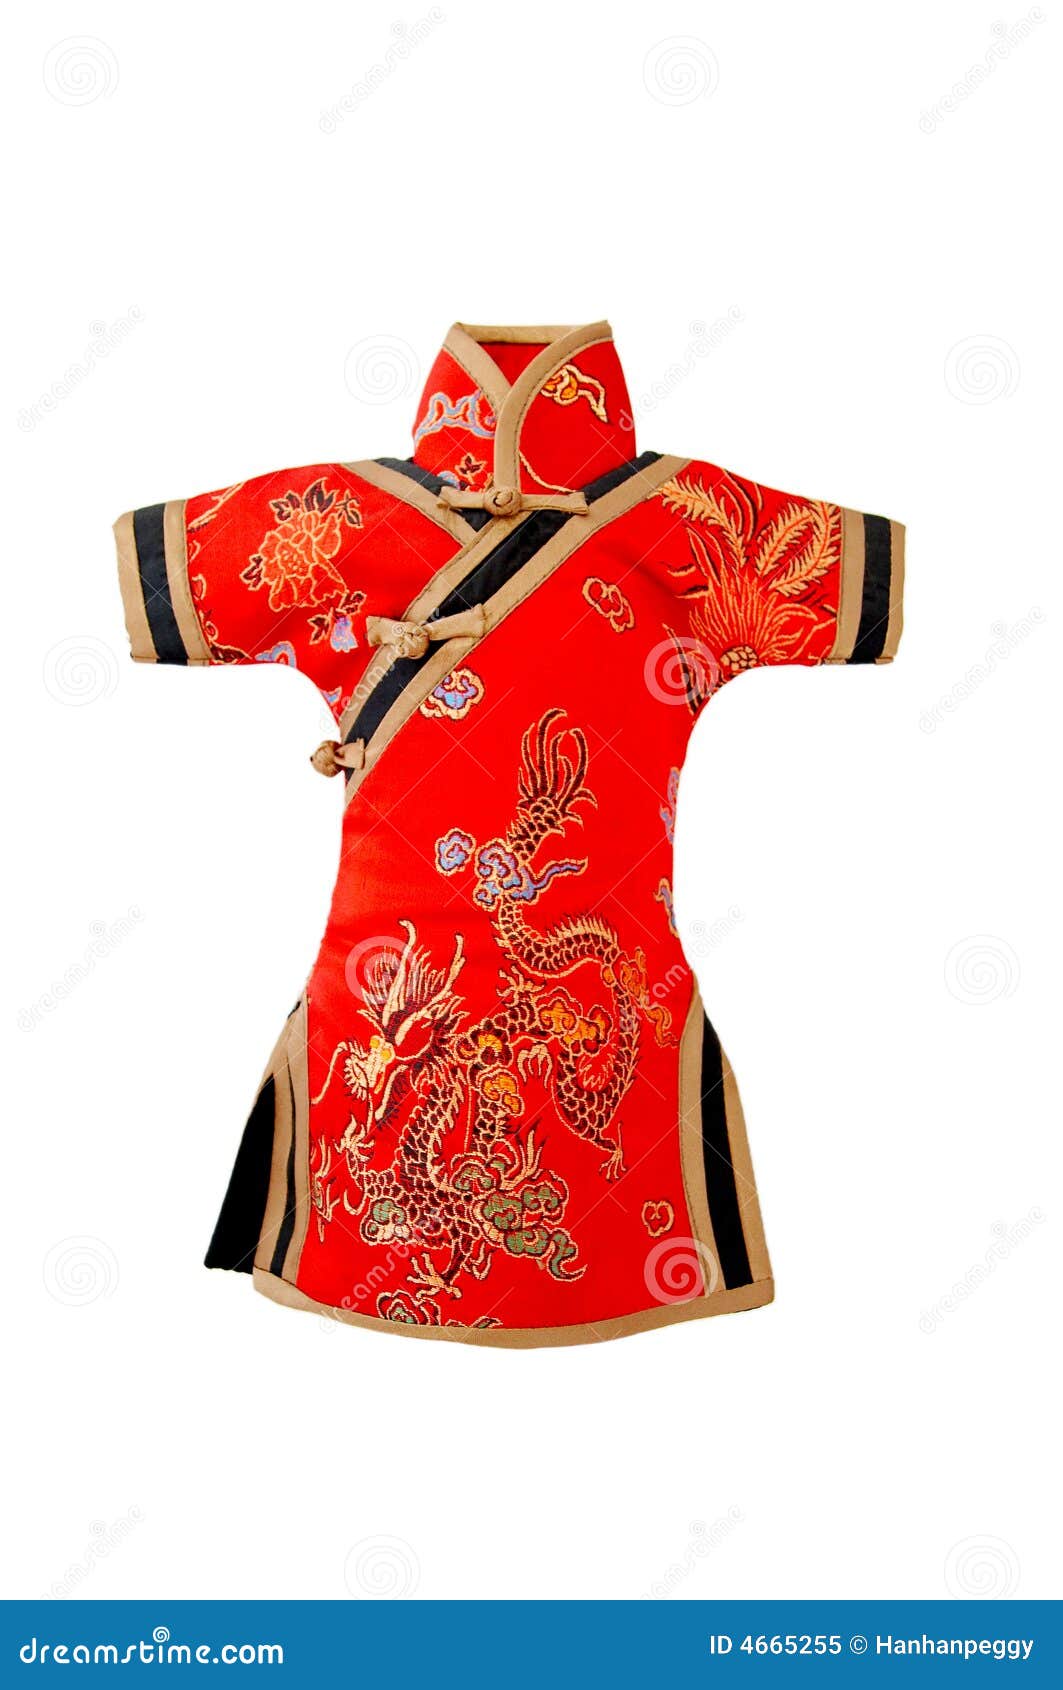 Vooruitgang Anekdote Zegevieren Traditionele Chinese Kleding Stock Afbeelding - Image of knopen, manier:  4665255